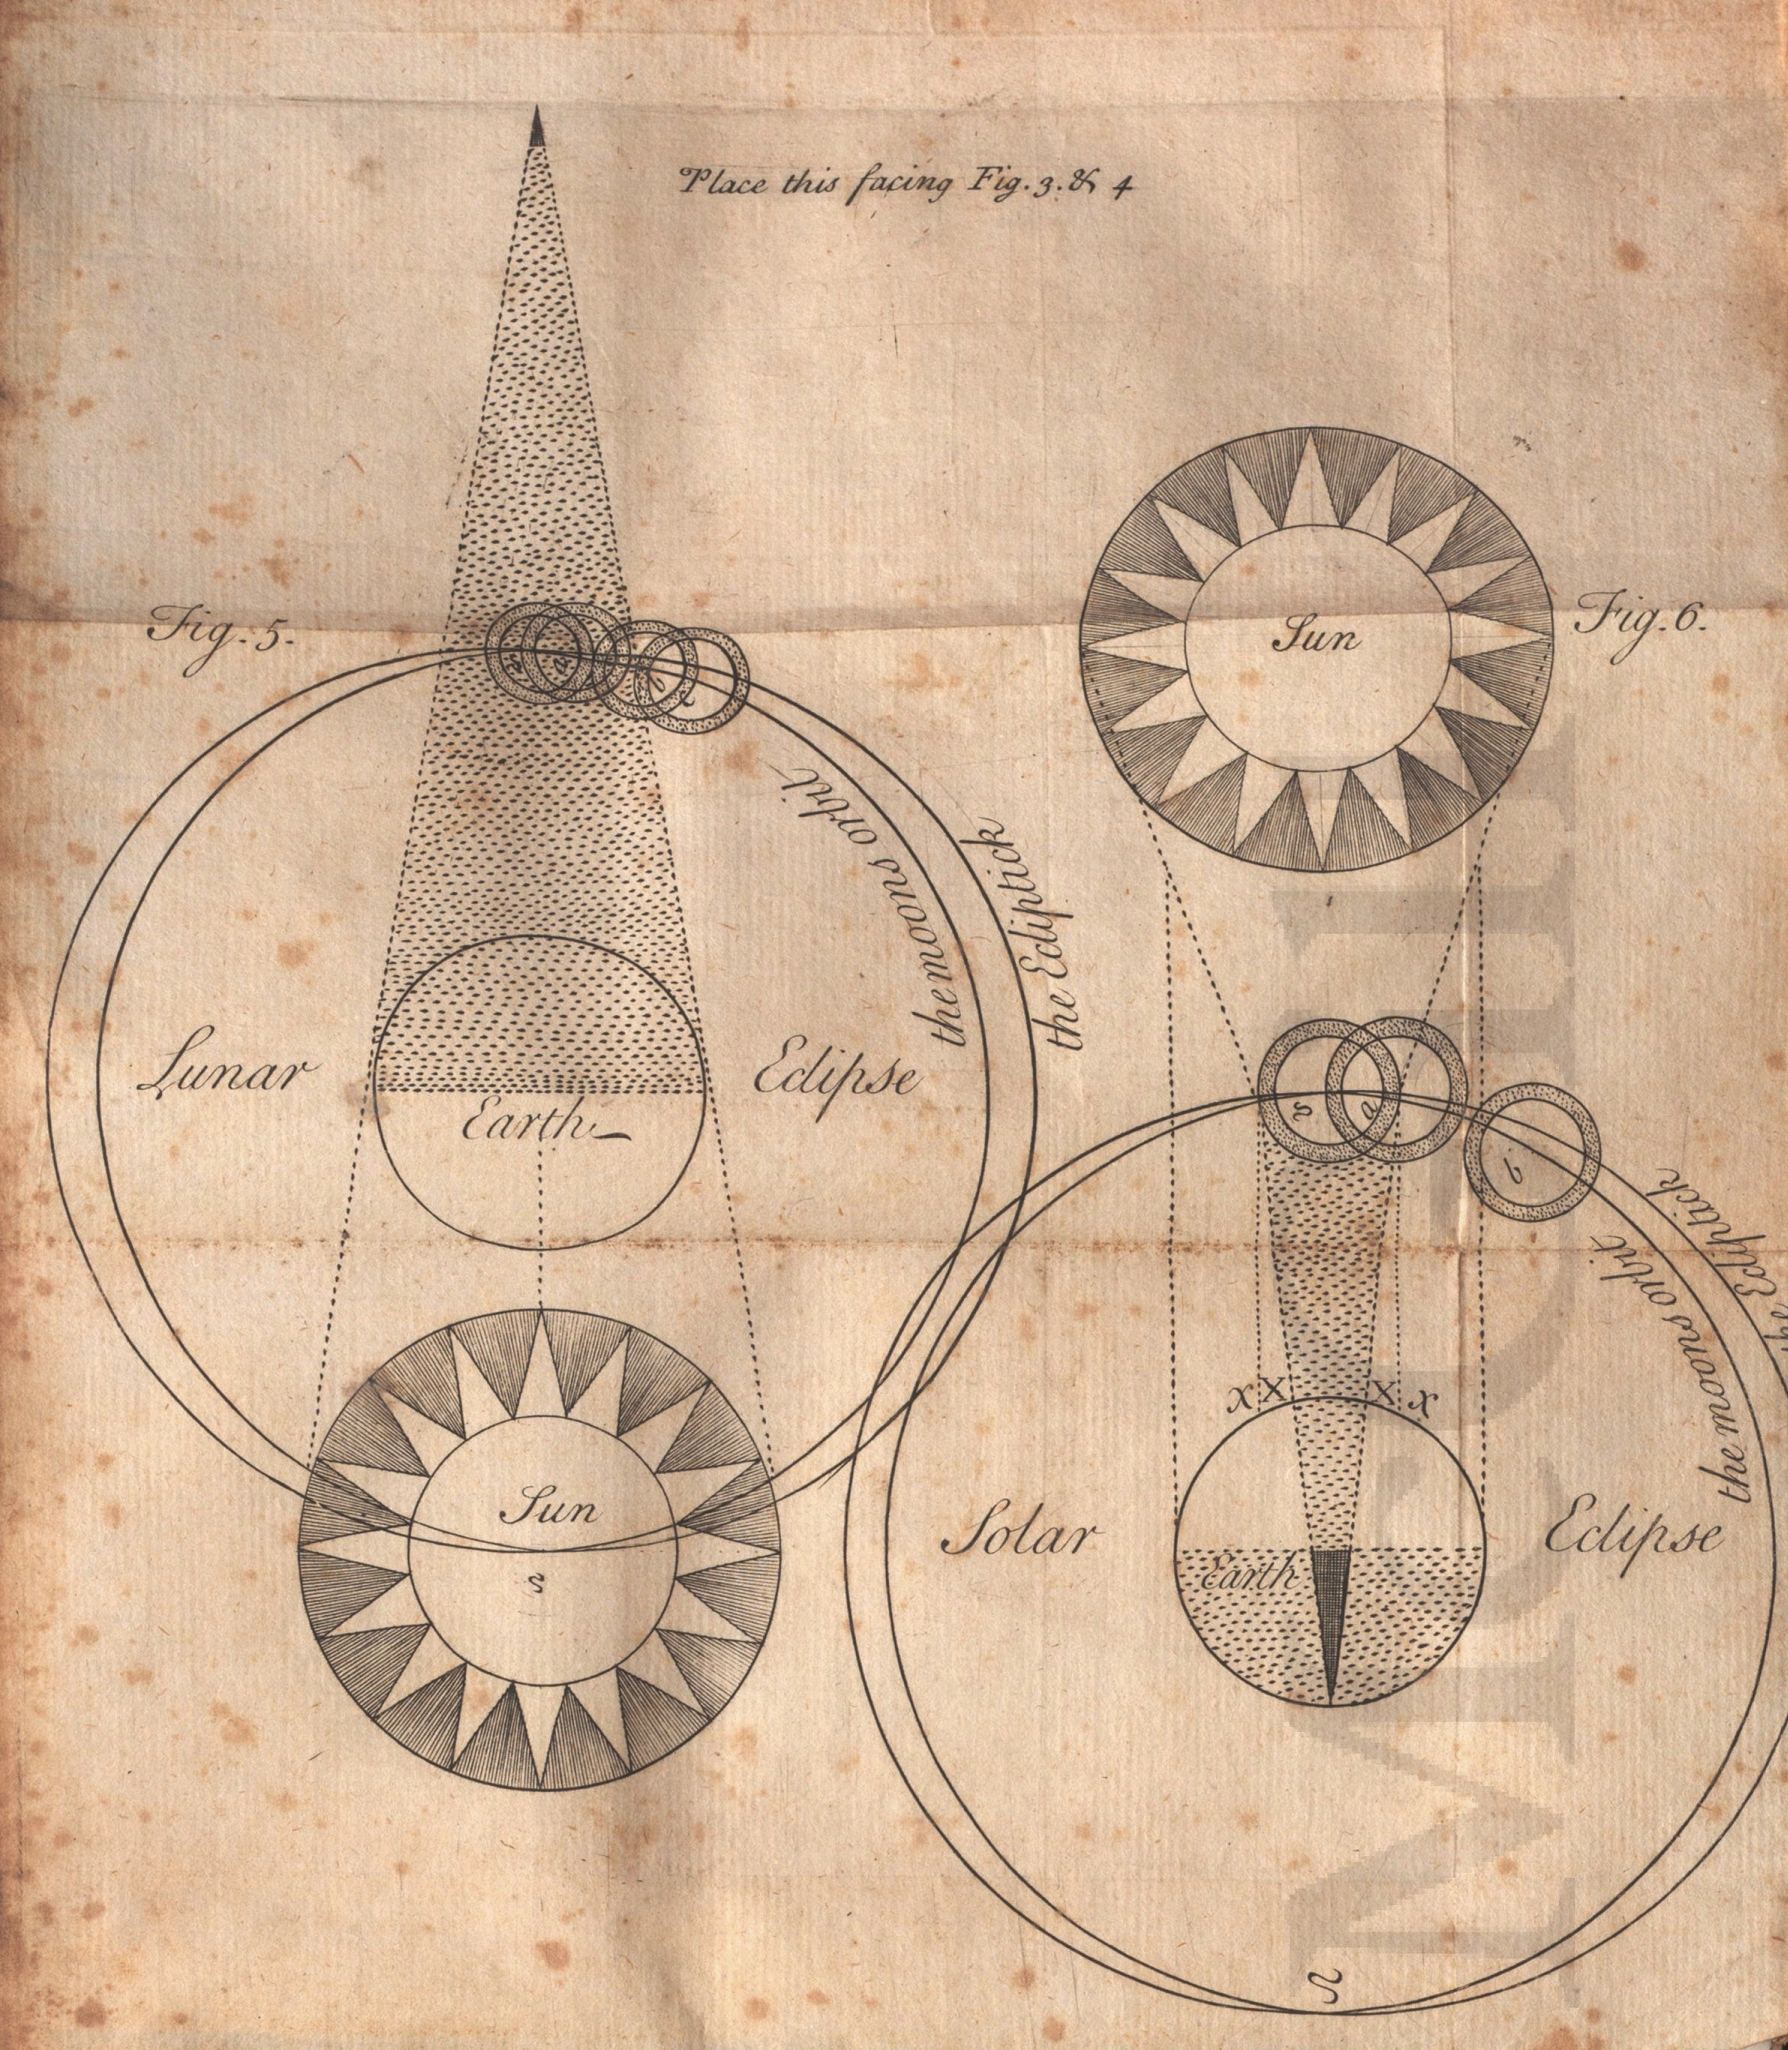 Jasper Charlton, "The ladies astronomy and chronology, in four parts" (1738)